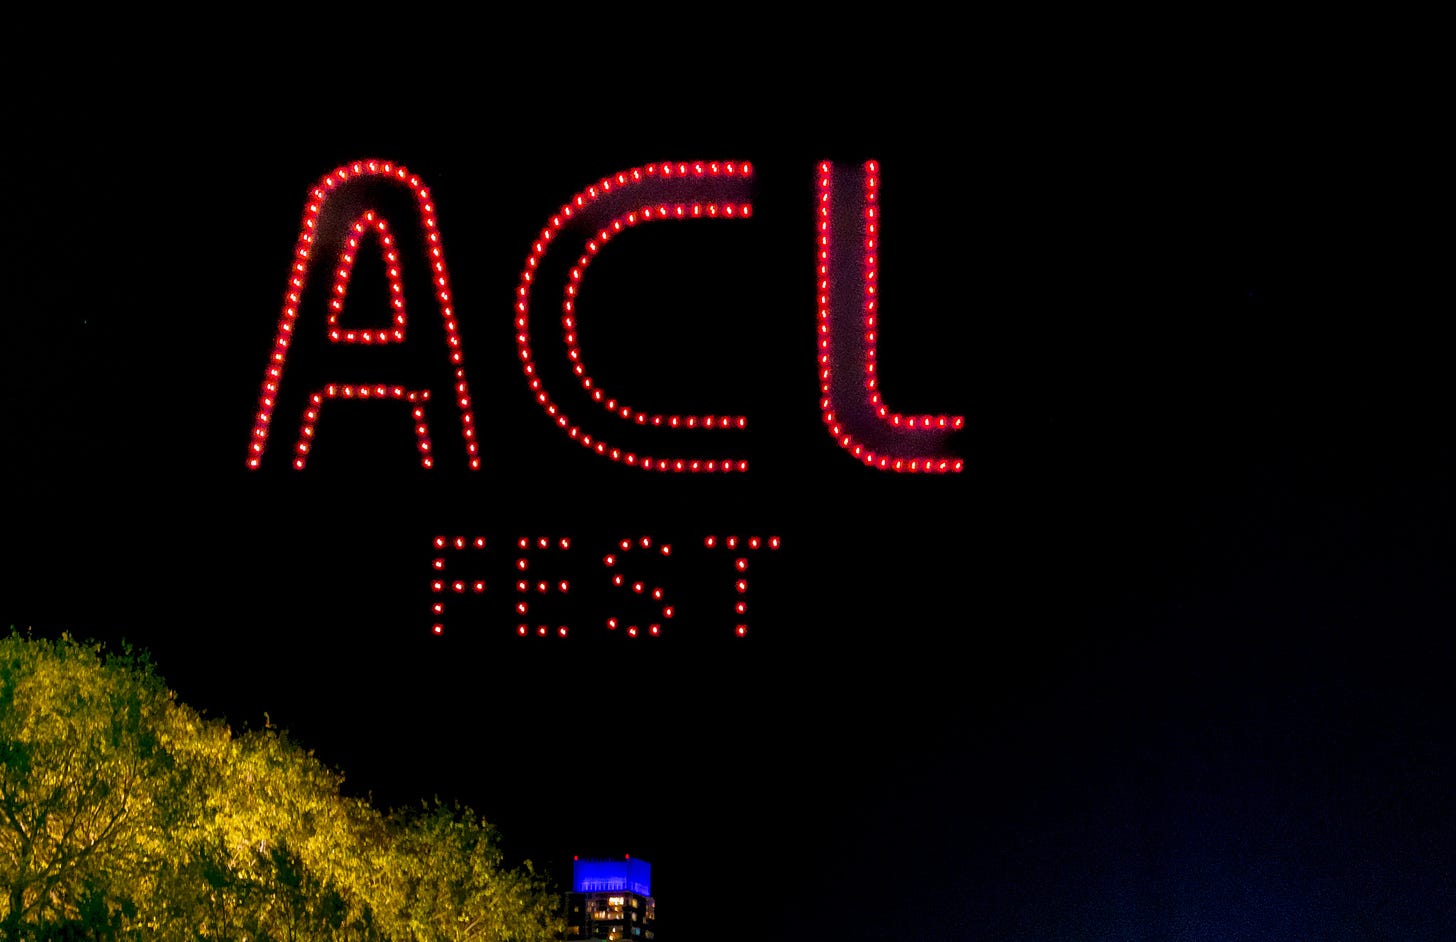 Drones with red lights spel out ACL Fest against the dark night sky; a lighted tree and the outline of a downtown building in the lower left 